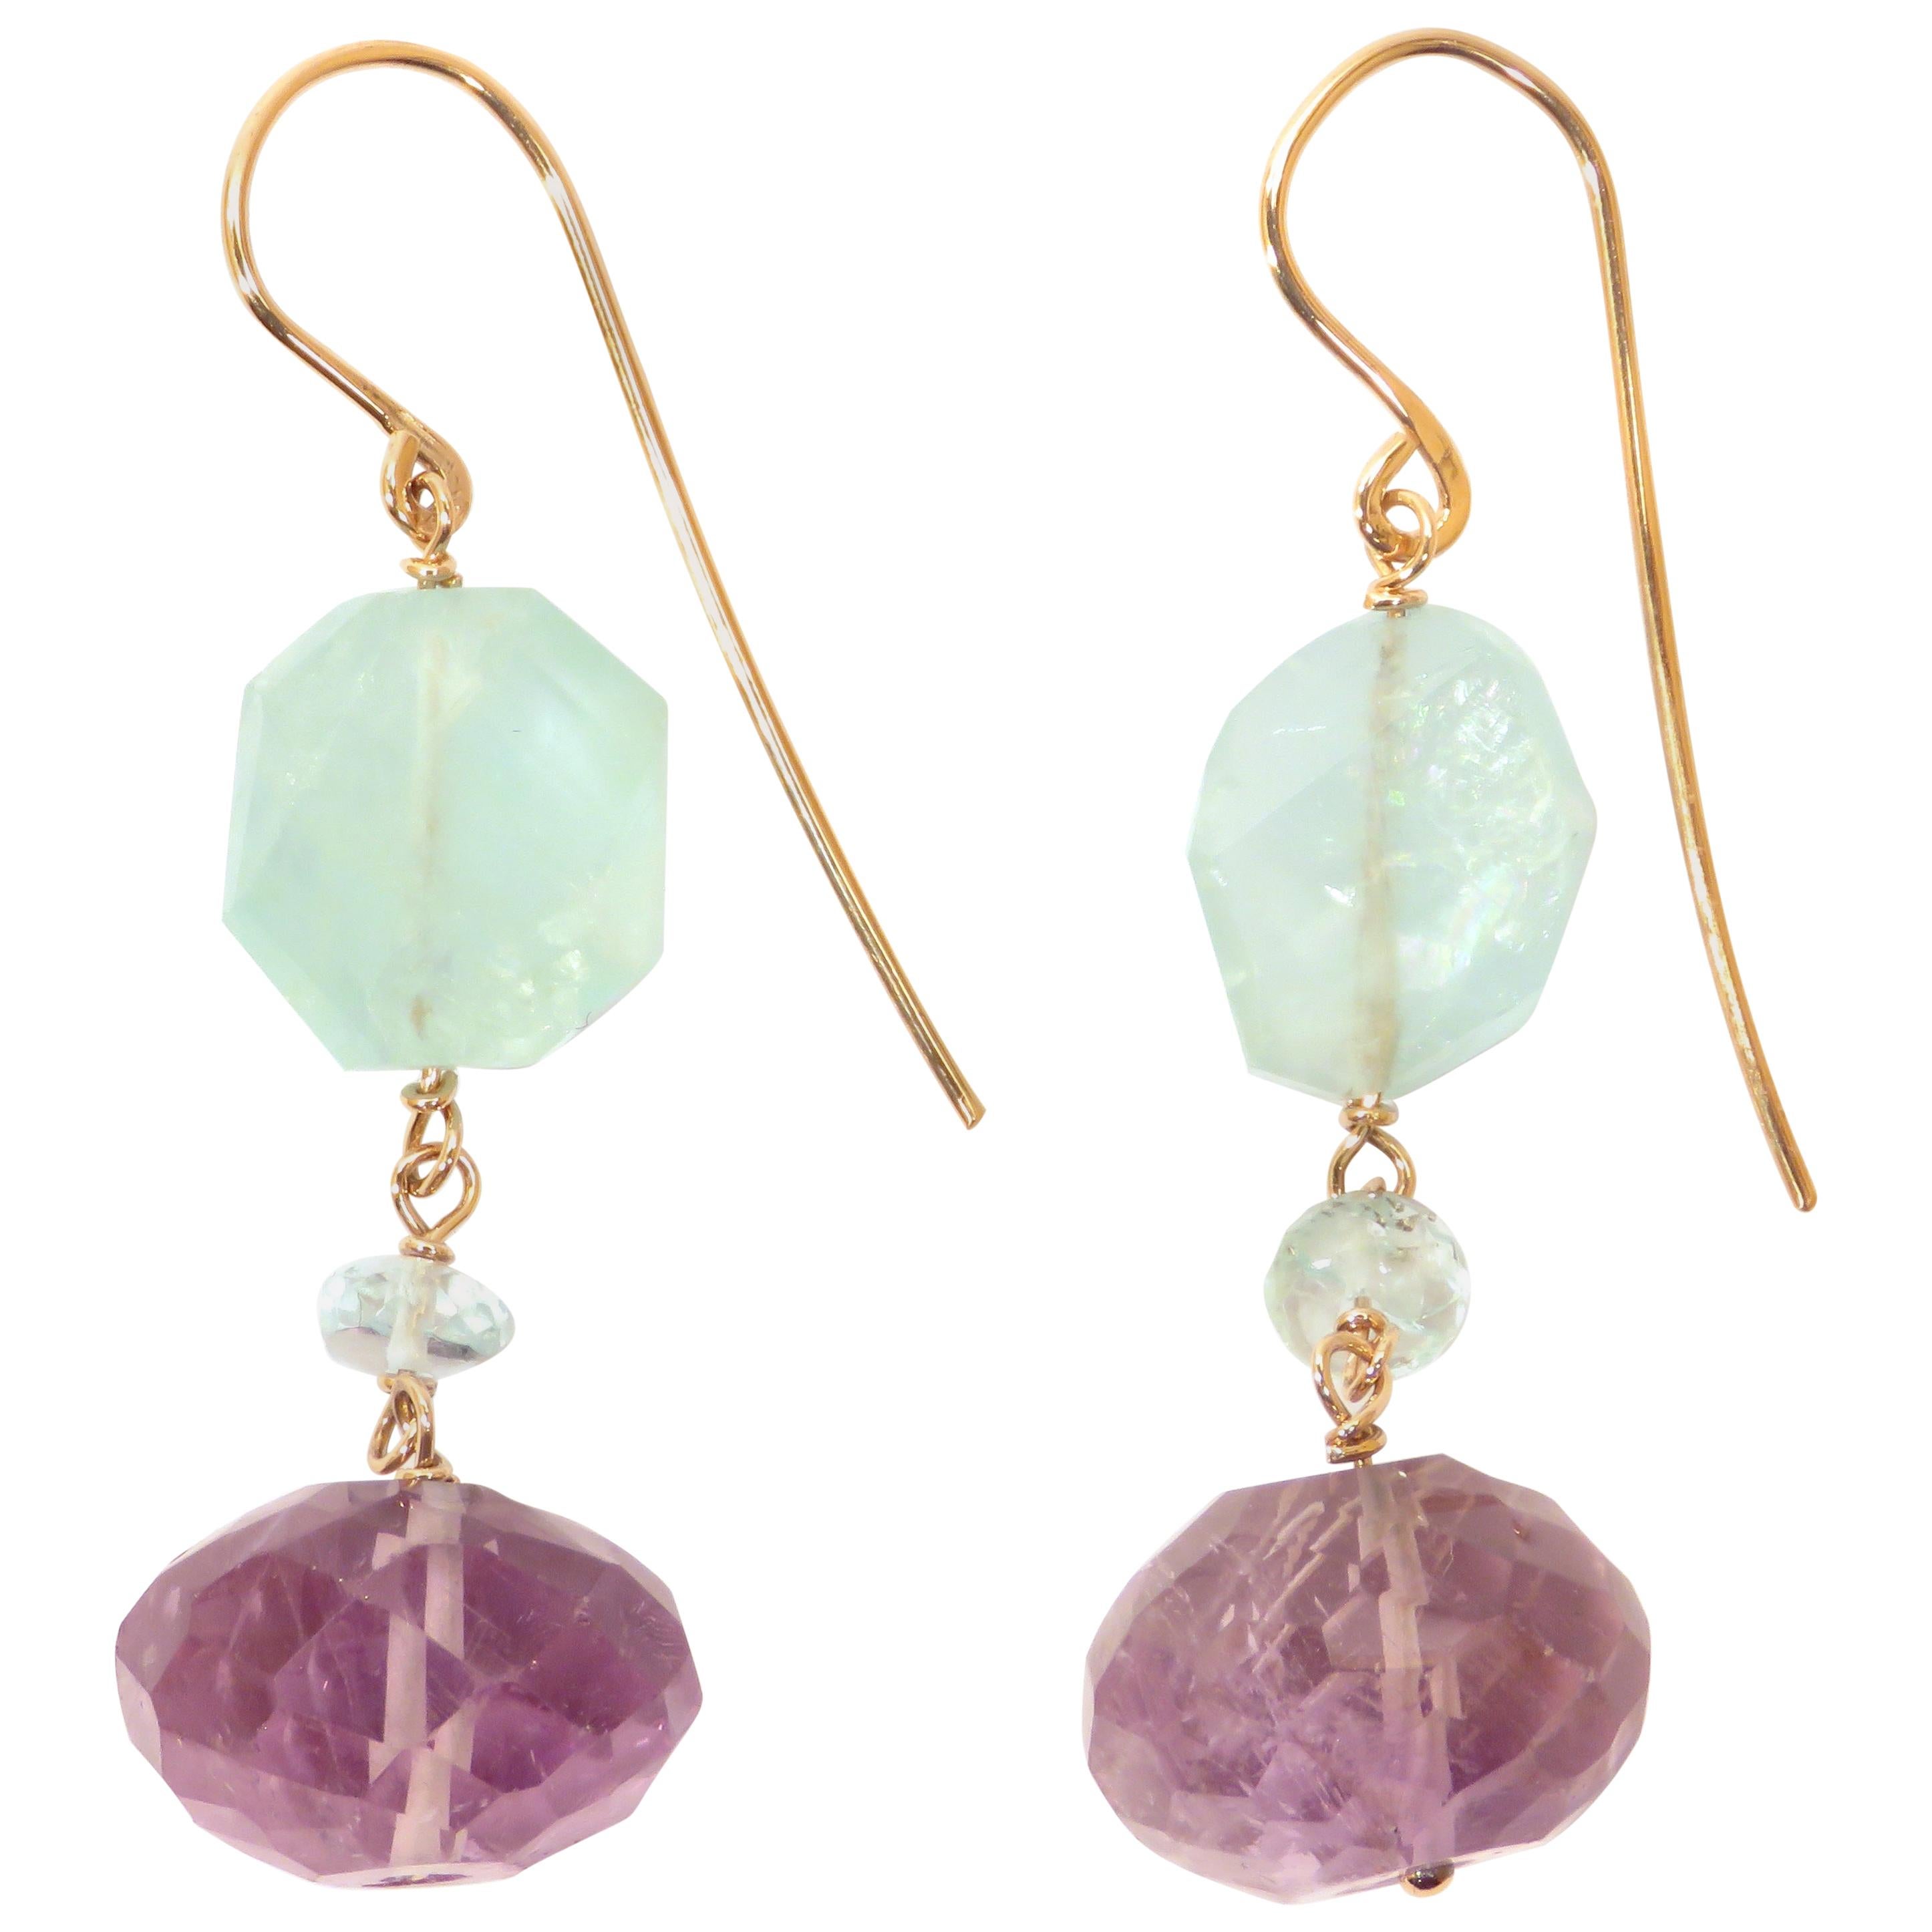 Amethyst Aquamarine Rose Gold Earrings Handcrafted in Italy by Botta Gioielli